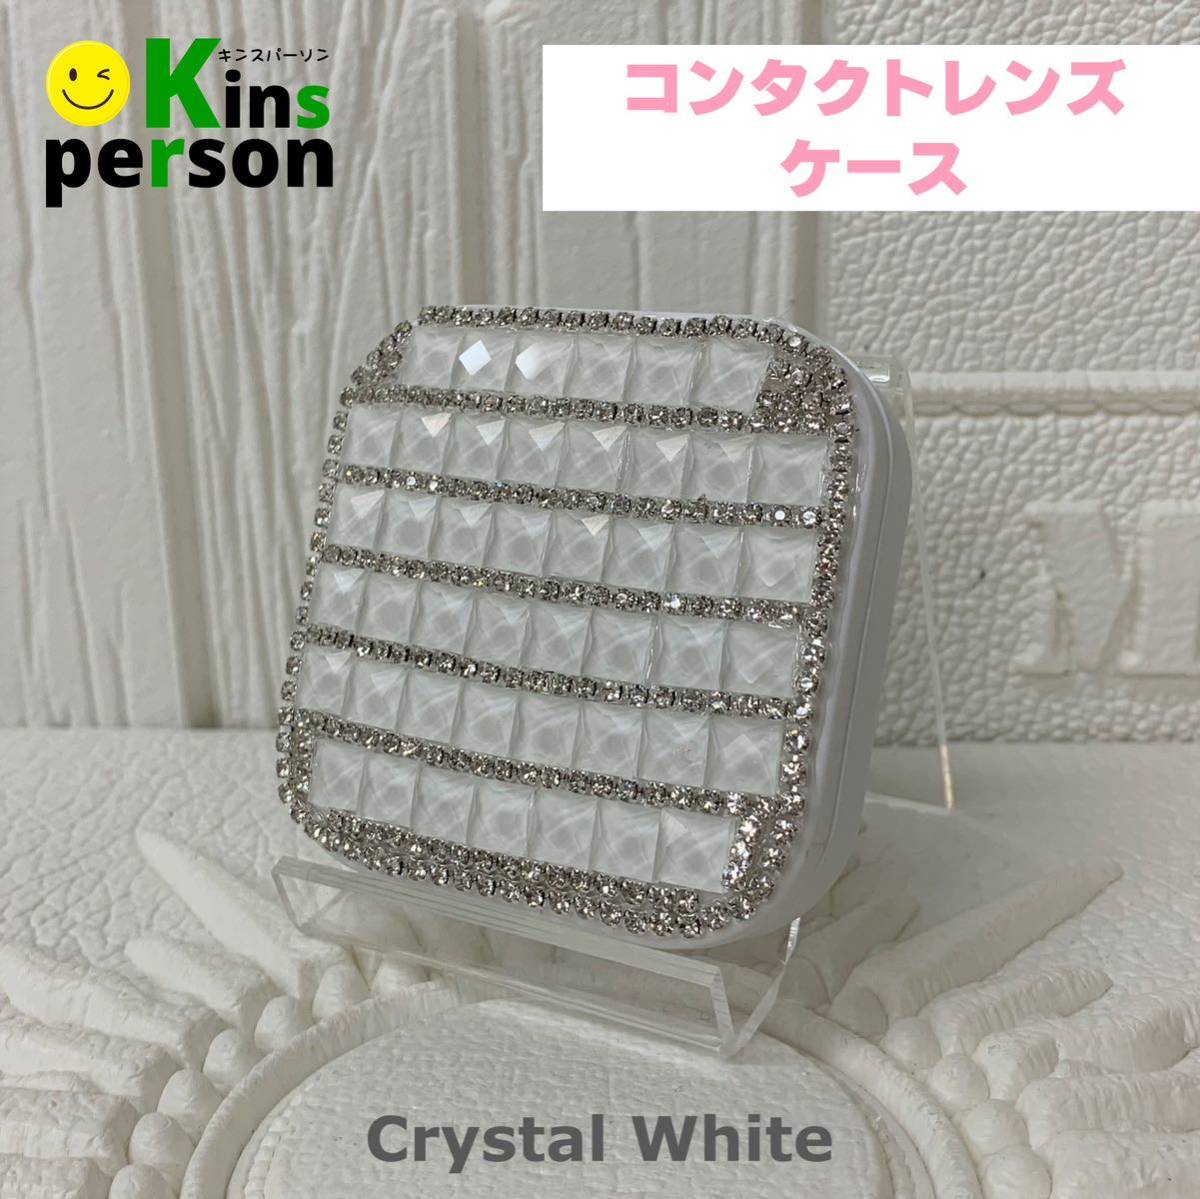  goods with special circumstances new goods crystal contact lens case clear white kala navy blue case a stay mobile carrying travel deco Kirakira glass made goods 